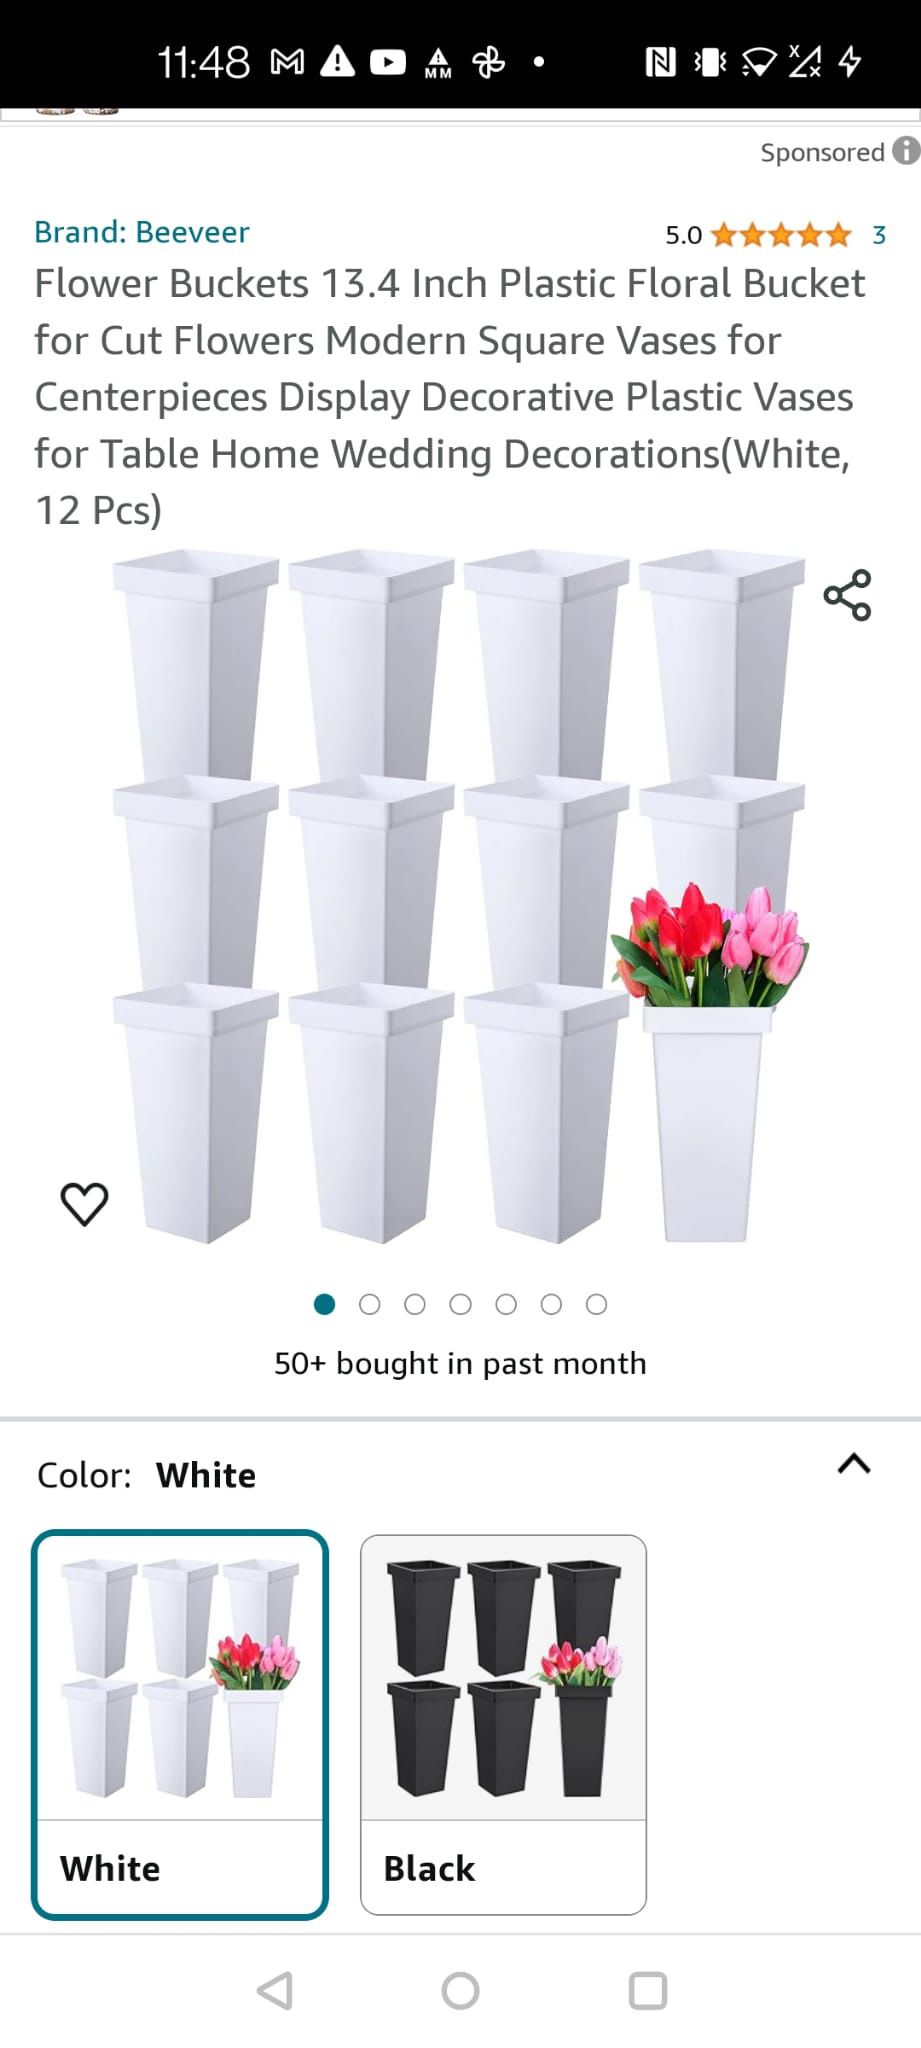 Flower Buckets 13.4 Inch Plastic Floral Bucket for Cut Flowers Modern Square Vases for Centerpieces Display Decorative Plastic Vases for Table Home We